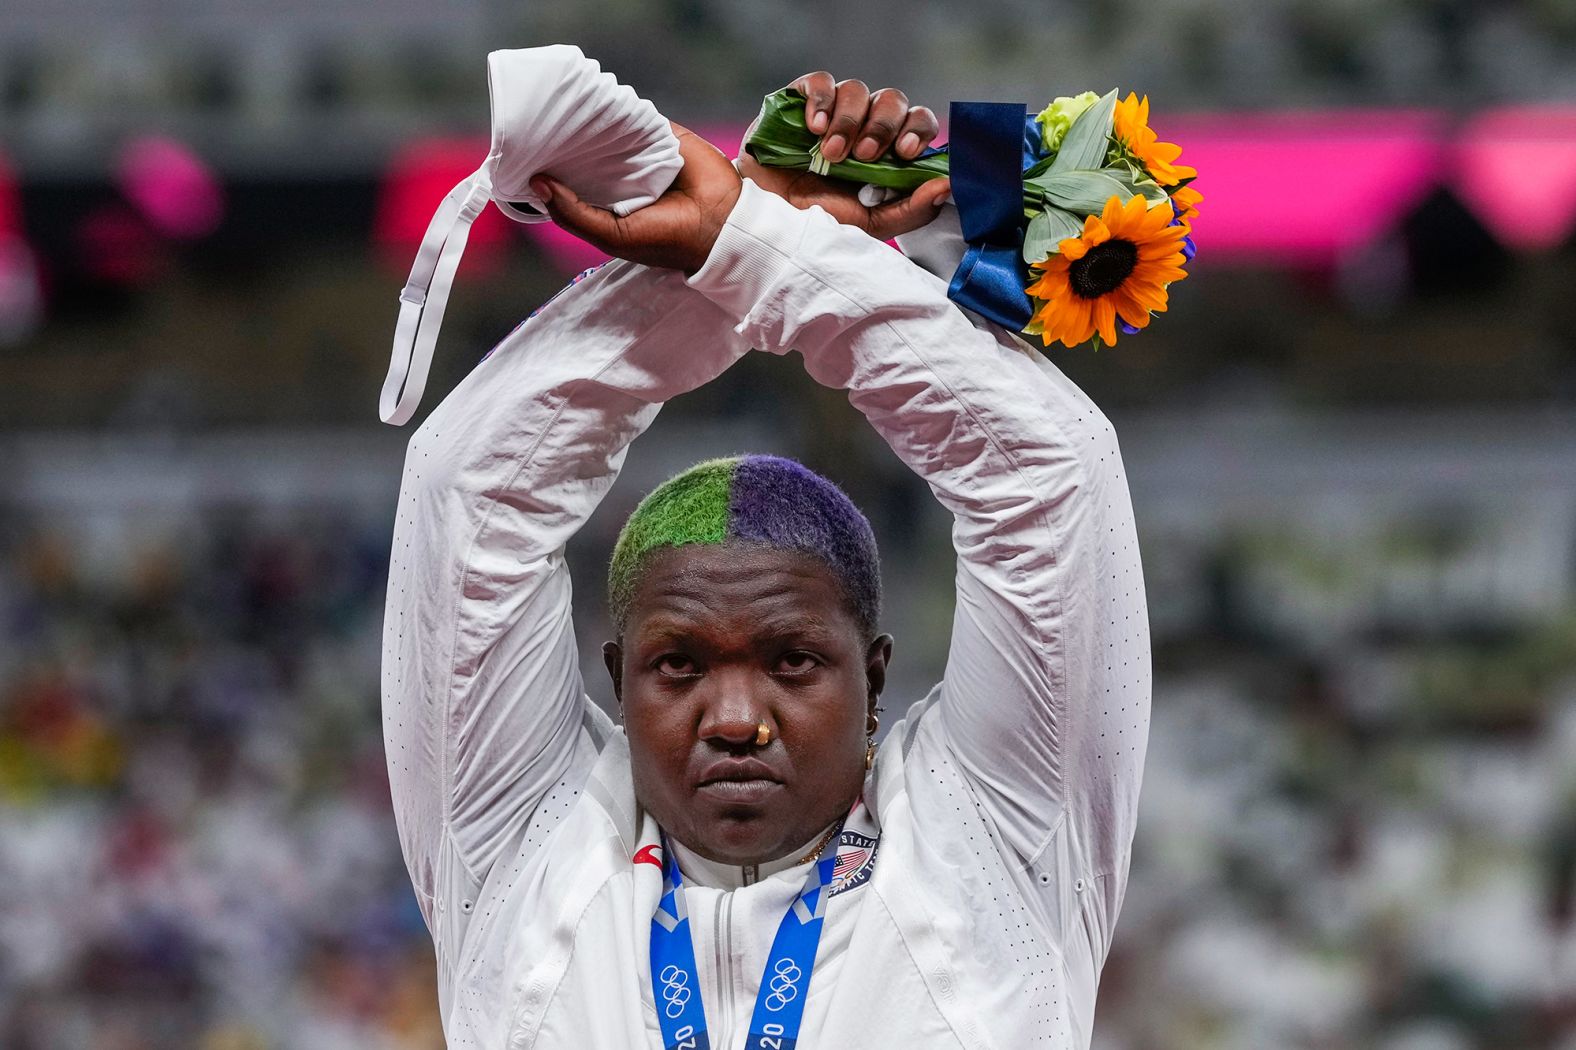 During the medal ceremony for the women's shot put, the United States' Raven Saunders lifted her arms above her head and made an X with her wrists. When the silver medalist was asked what <a href="index.php?page=&url=https%3A%2F%2Fwww.cnn.com%2F2021%2F08%2F02%2Fsport%2Fraven-saunders-podium-protest-olympics-spt-intl%2Findex.html" target="_blank">the gesture</a> meant, she explained that "it's the intersection of where all people who are oppressed meet." Saunders has been outspoken in the past about <a href="index.php?page=&url=https%3A%2F%2Fwww.cnn.com%2F2021%2F05%2F27%2Fsport%2Fraven-saunders-olympics-shot-put-spt-intl-cmd%2Findex.html" target="_blank">her desire to destigmatize mental health.</a> "Shout out to all my Black people. Shout out to all my LGBTQ community. Shout out to all my people dealing with mental health," she said. "At the end of the day, we understand it's bigger than us and it's bigger than the powers that be."